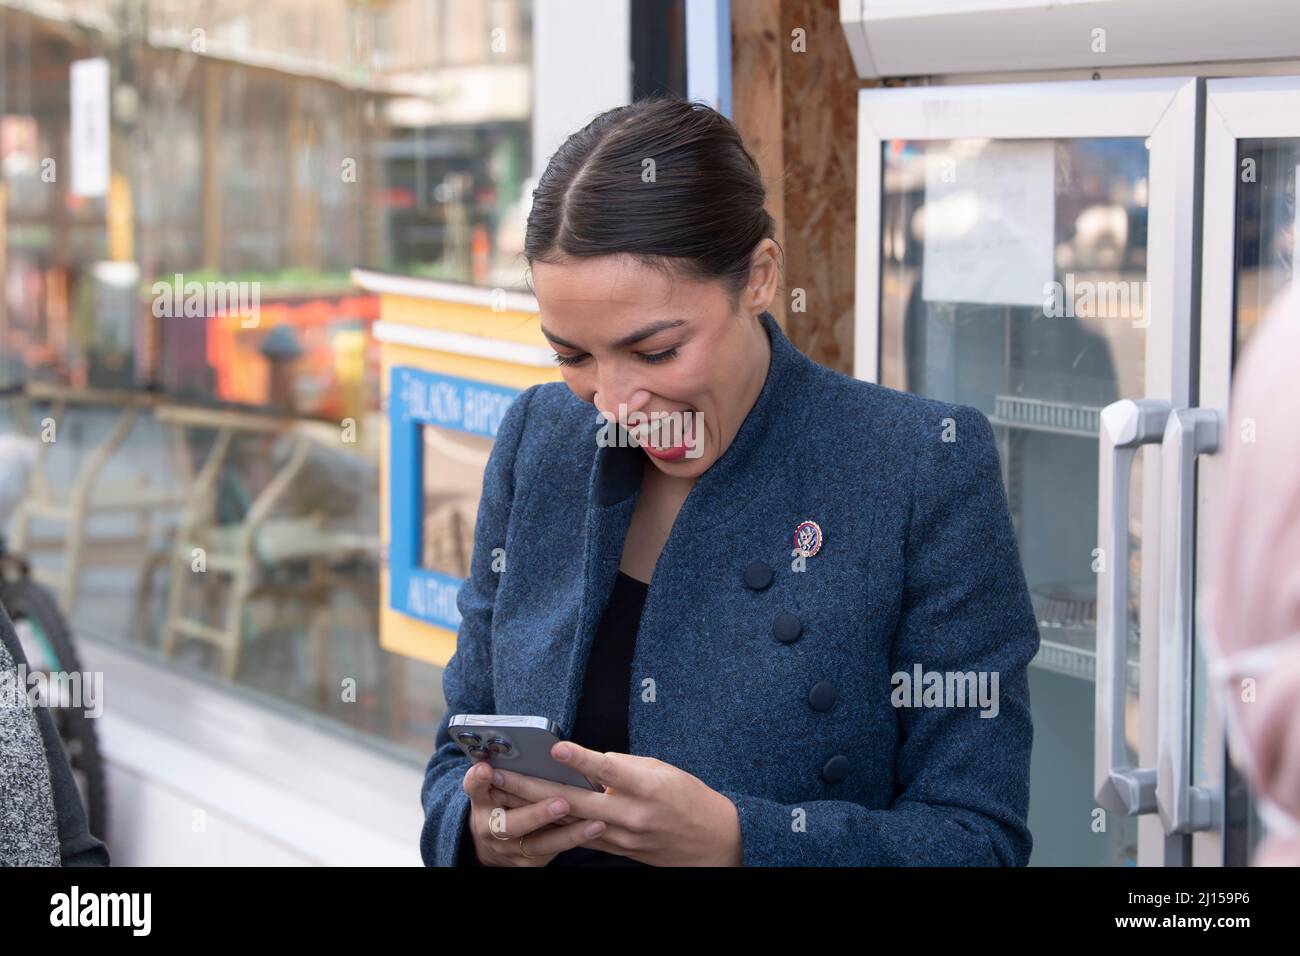 NEW YORK, NY – MARCH 22: United States Congresswoman Alexandria Ocasio-Cortez talks with local activist by a neighborhood fridge outside the Queensboro restaurant in Jackson Heights on March 22, 2022 in New York City.  Representative Alexandria Ocasio-Cortez presents a proclamation honoring the Queensboro restaurant's owners and workers in Jackson Heights neighborhood for serving over 500 meals to community members facing food insecurity during the height of the COVID-19 pandemic. Credit: Ron Adar/Alamy Live News Stock Photo